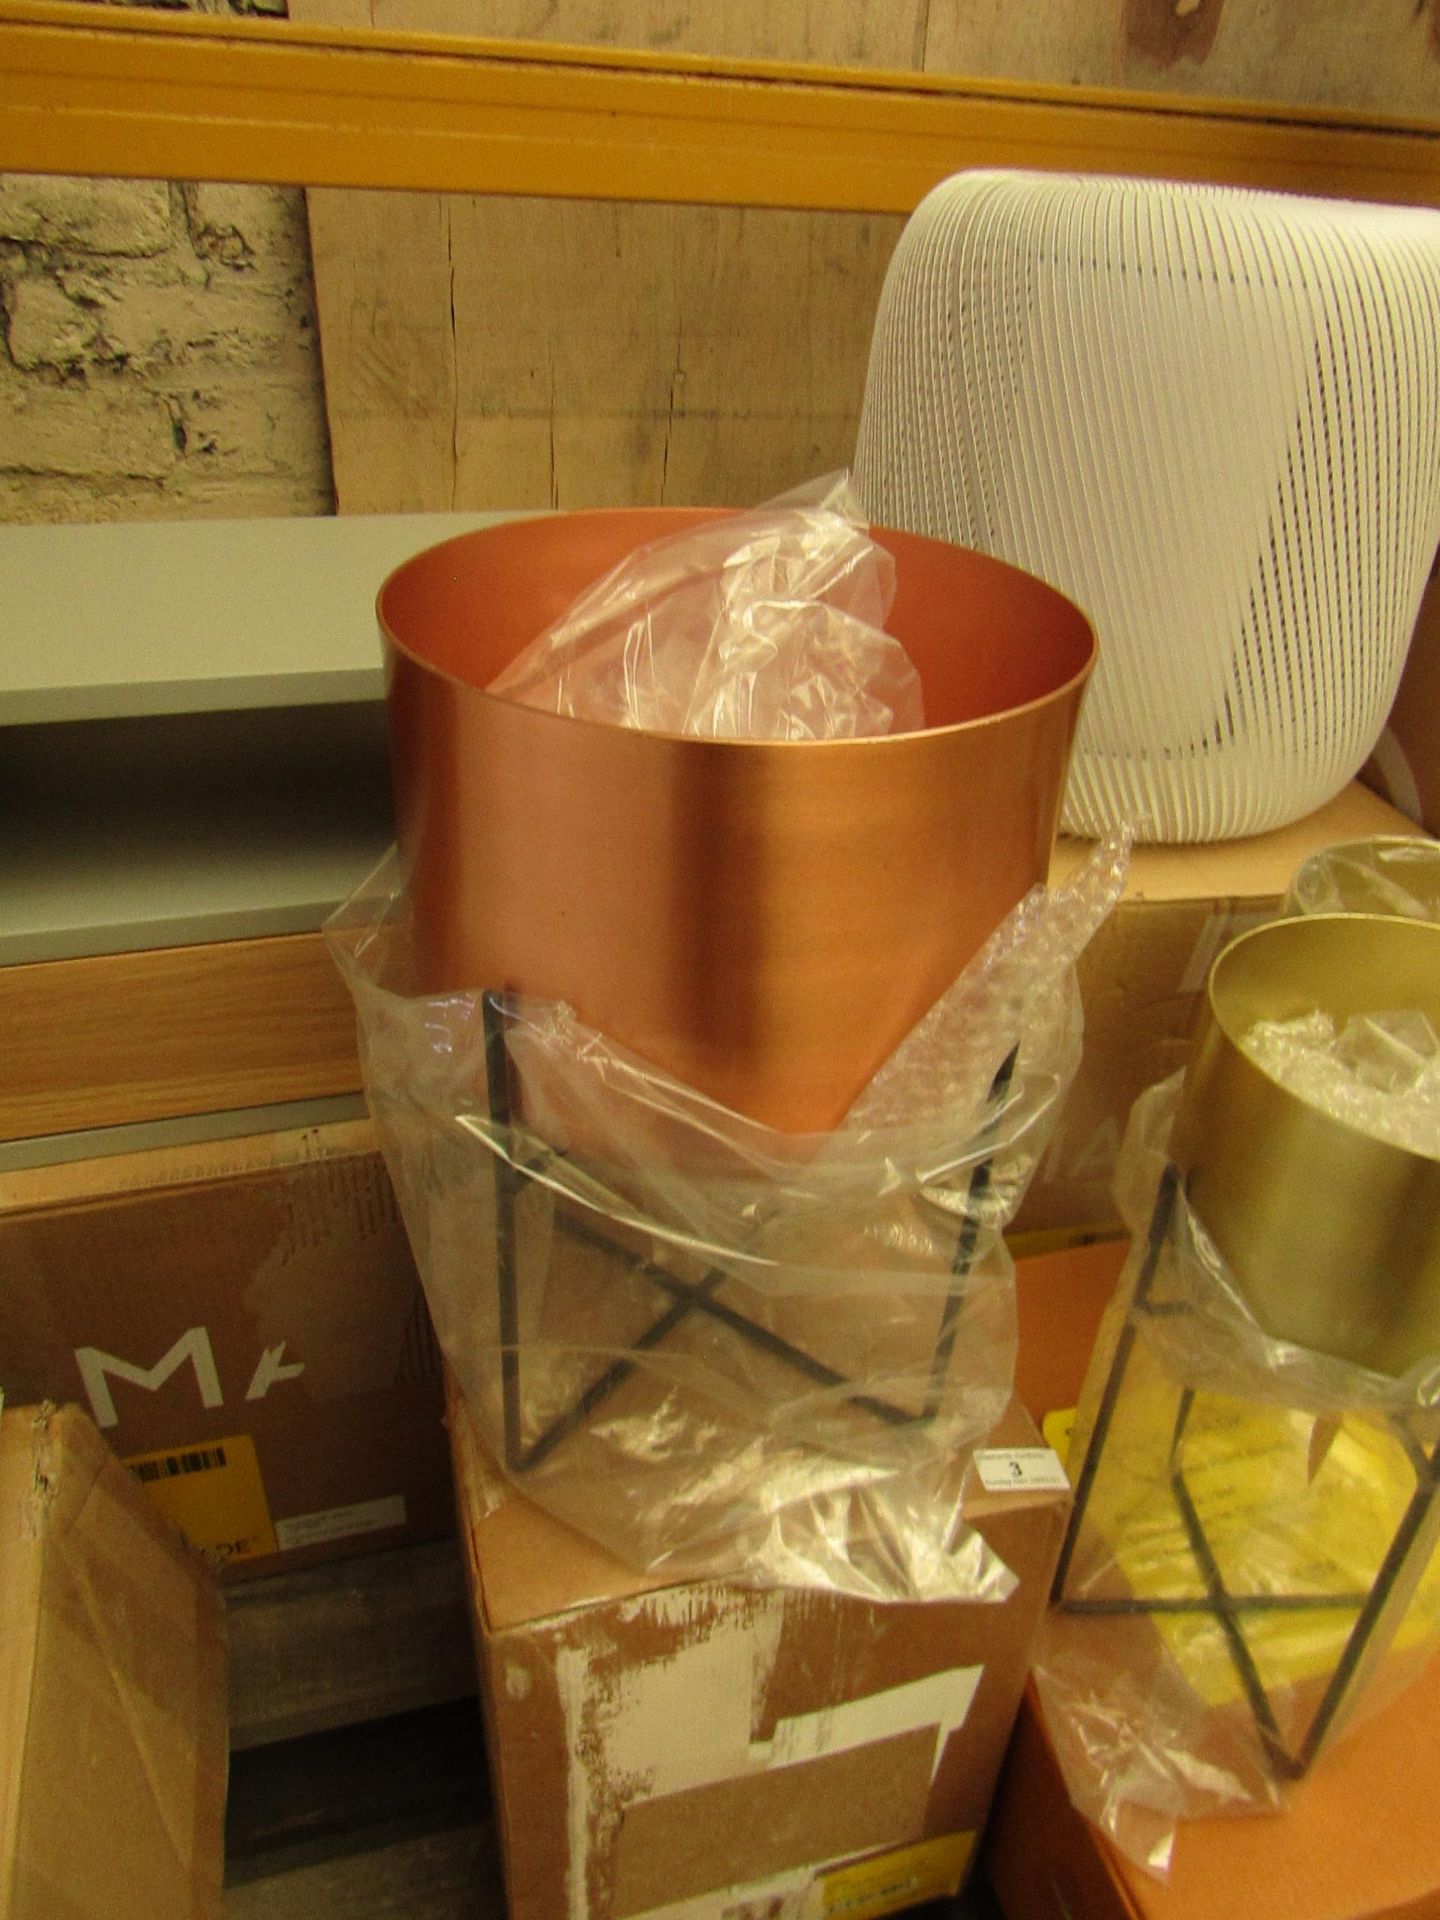 1 x Made.com Salix Large Planter Copper RRP £35 SKU MAD-IACSAL014COP-UK TOTAL RRP £35 This lot is